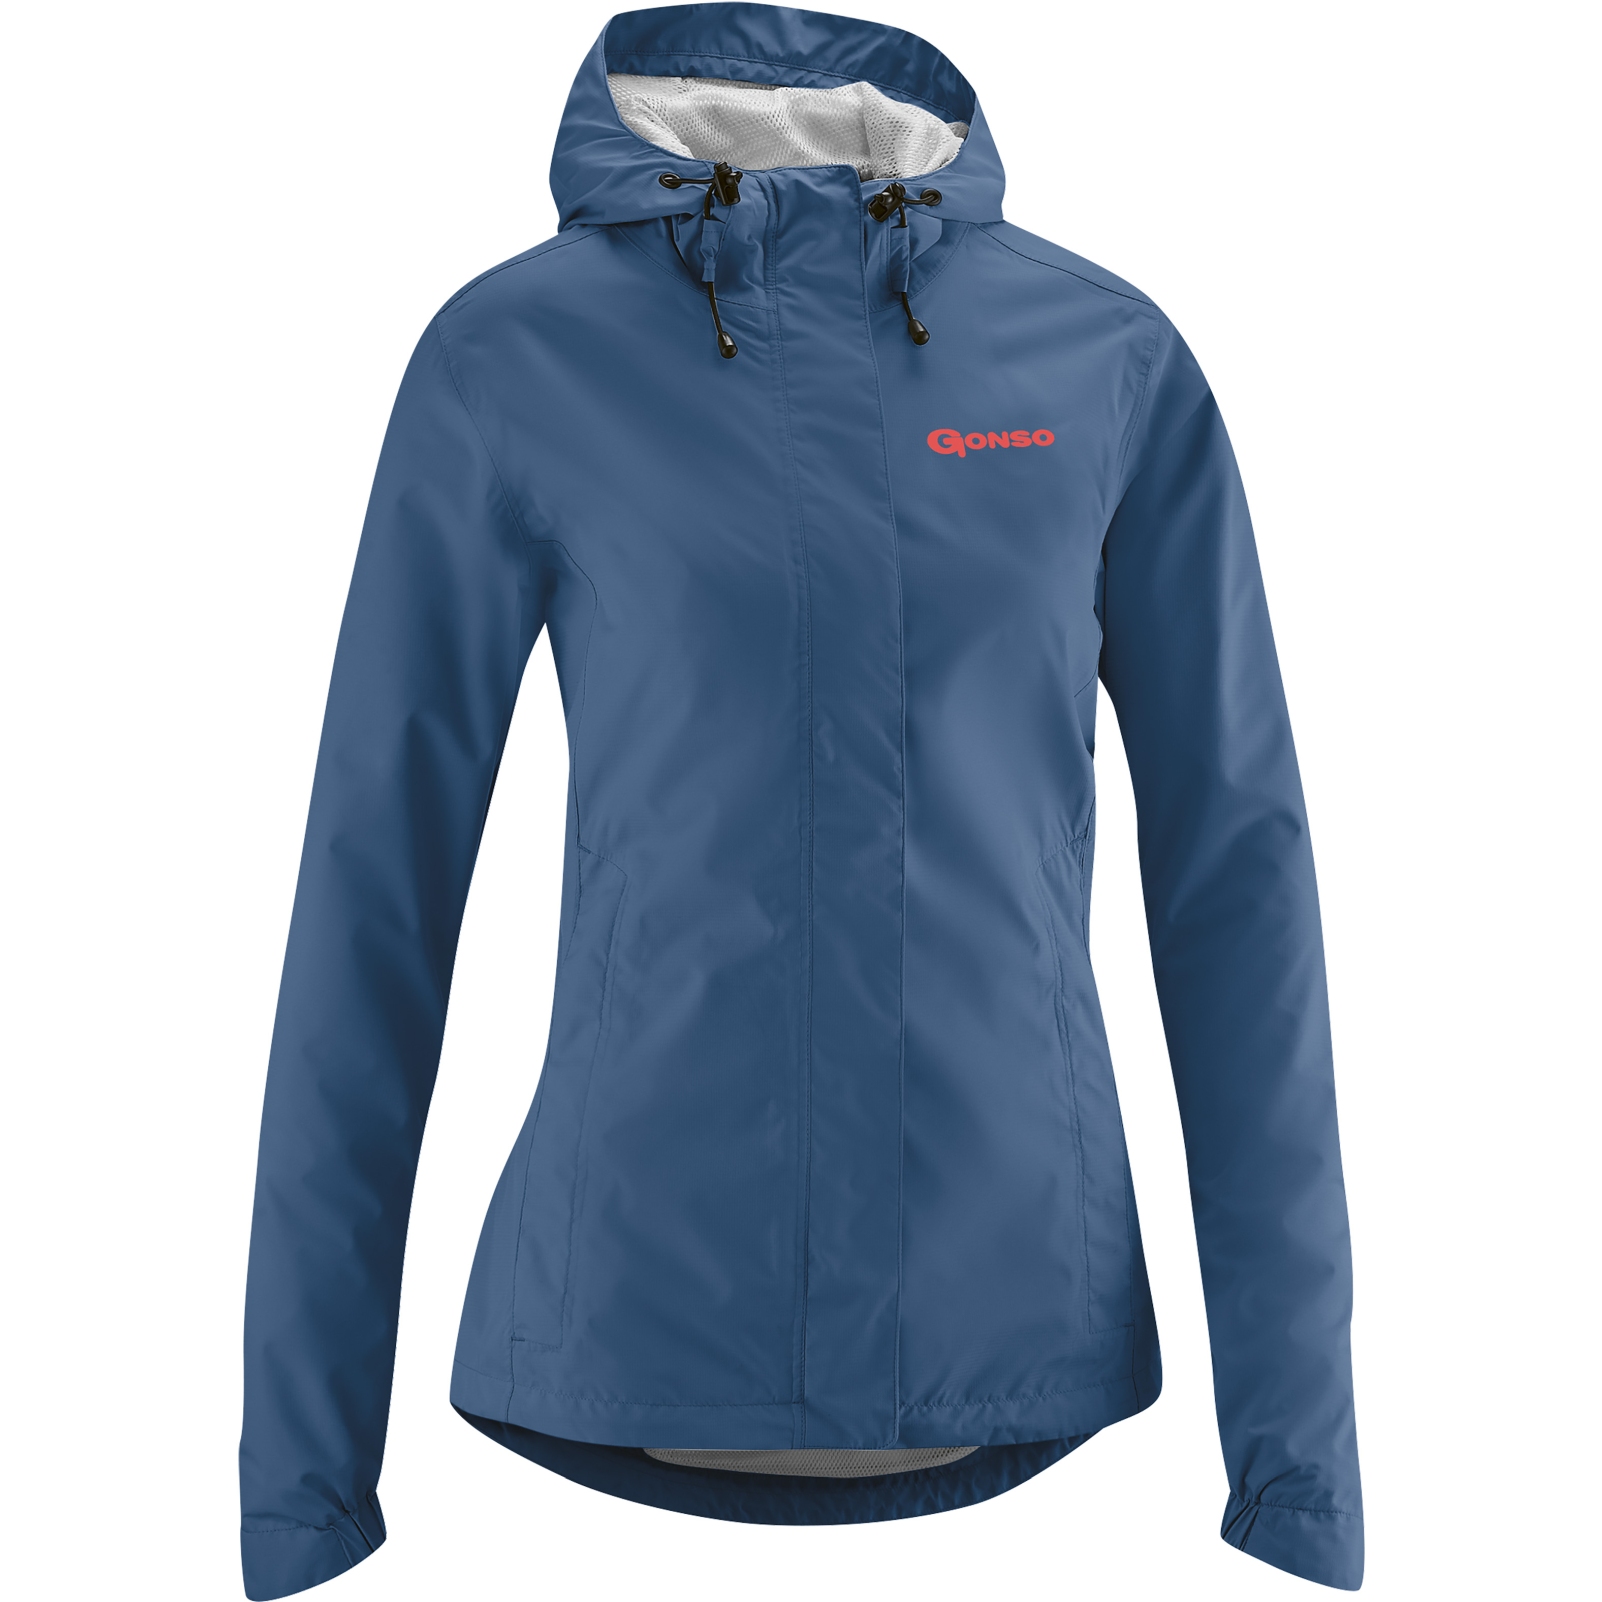 Image of Gonso Sura Light Women's All-Weather Jacket - Insignia Blue